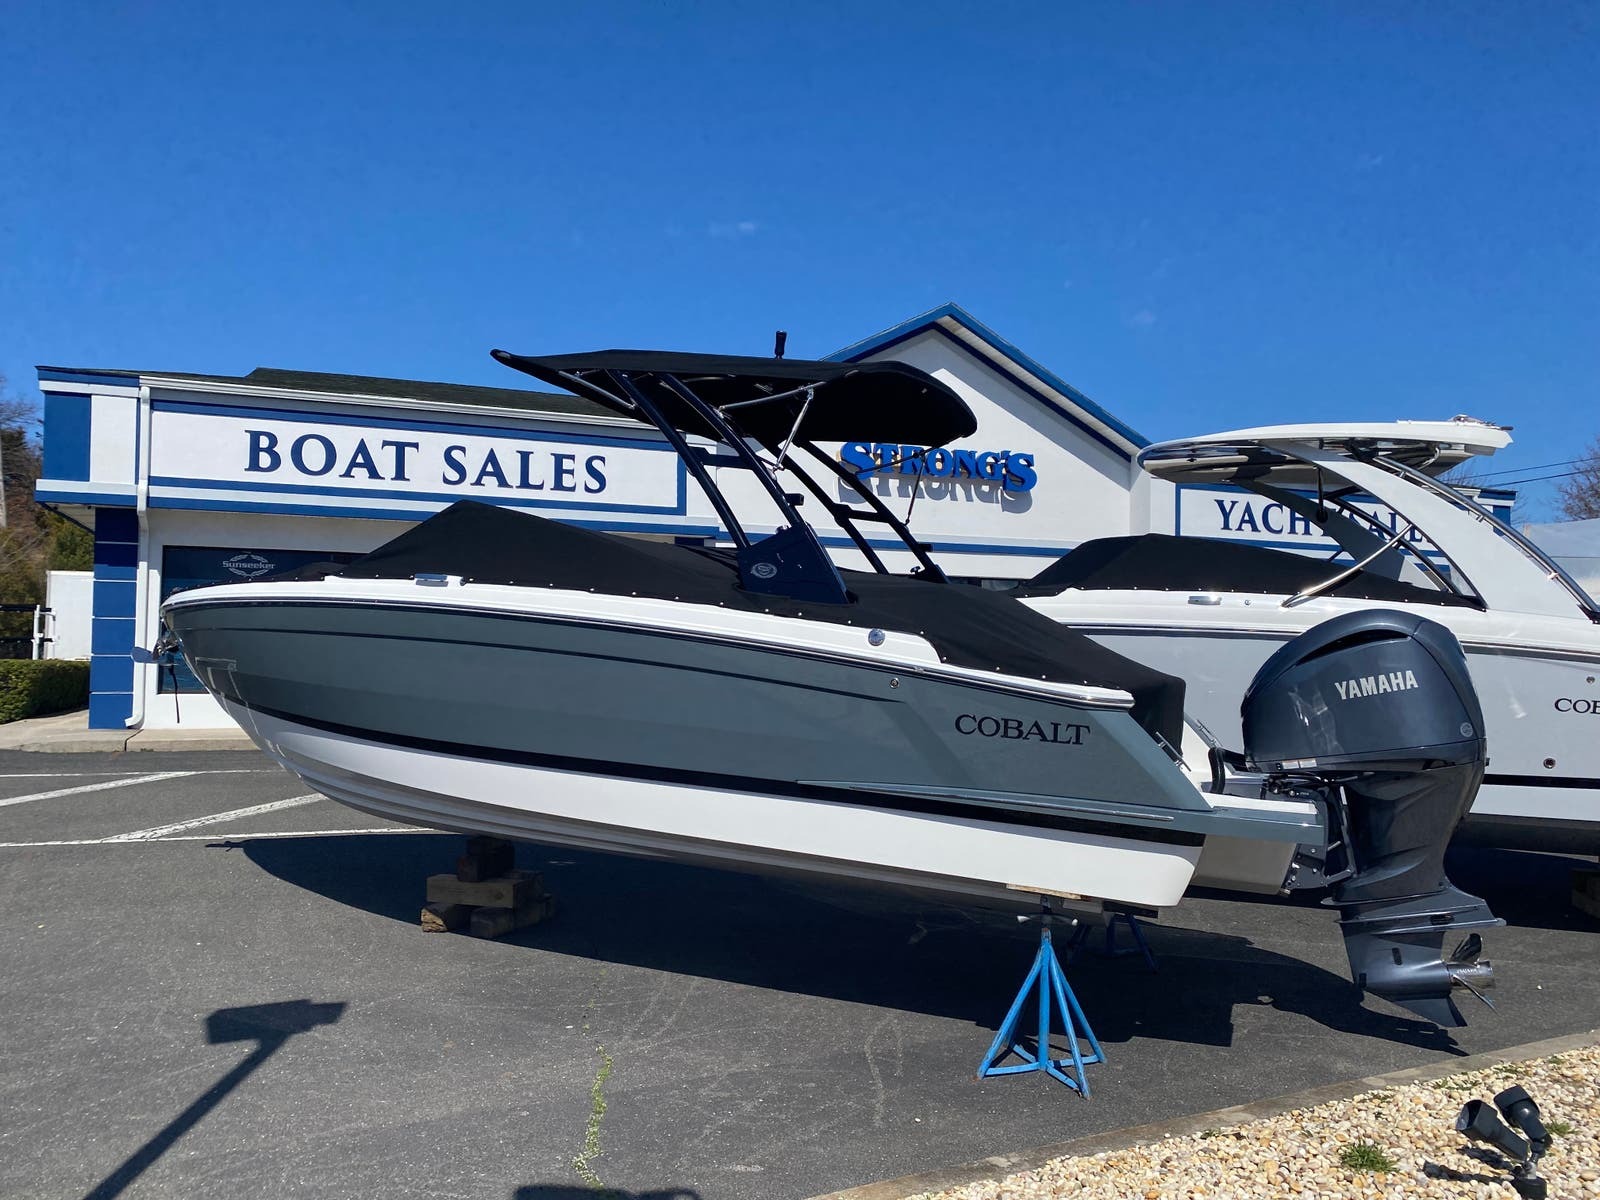 COURTESY BRIDGET RYMER A Cobalt sport boat available at Strong's in Southampton.